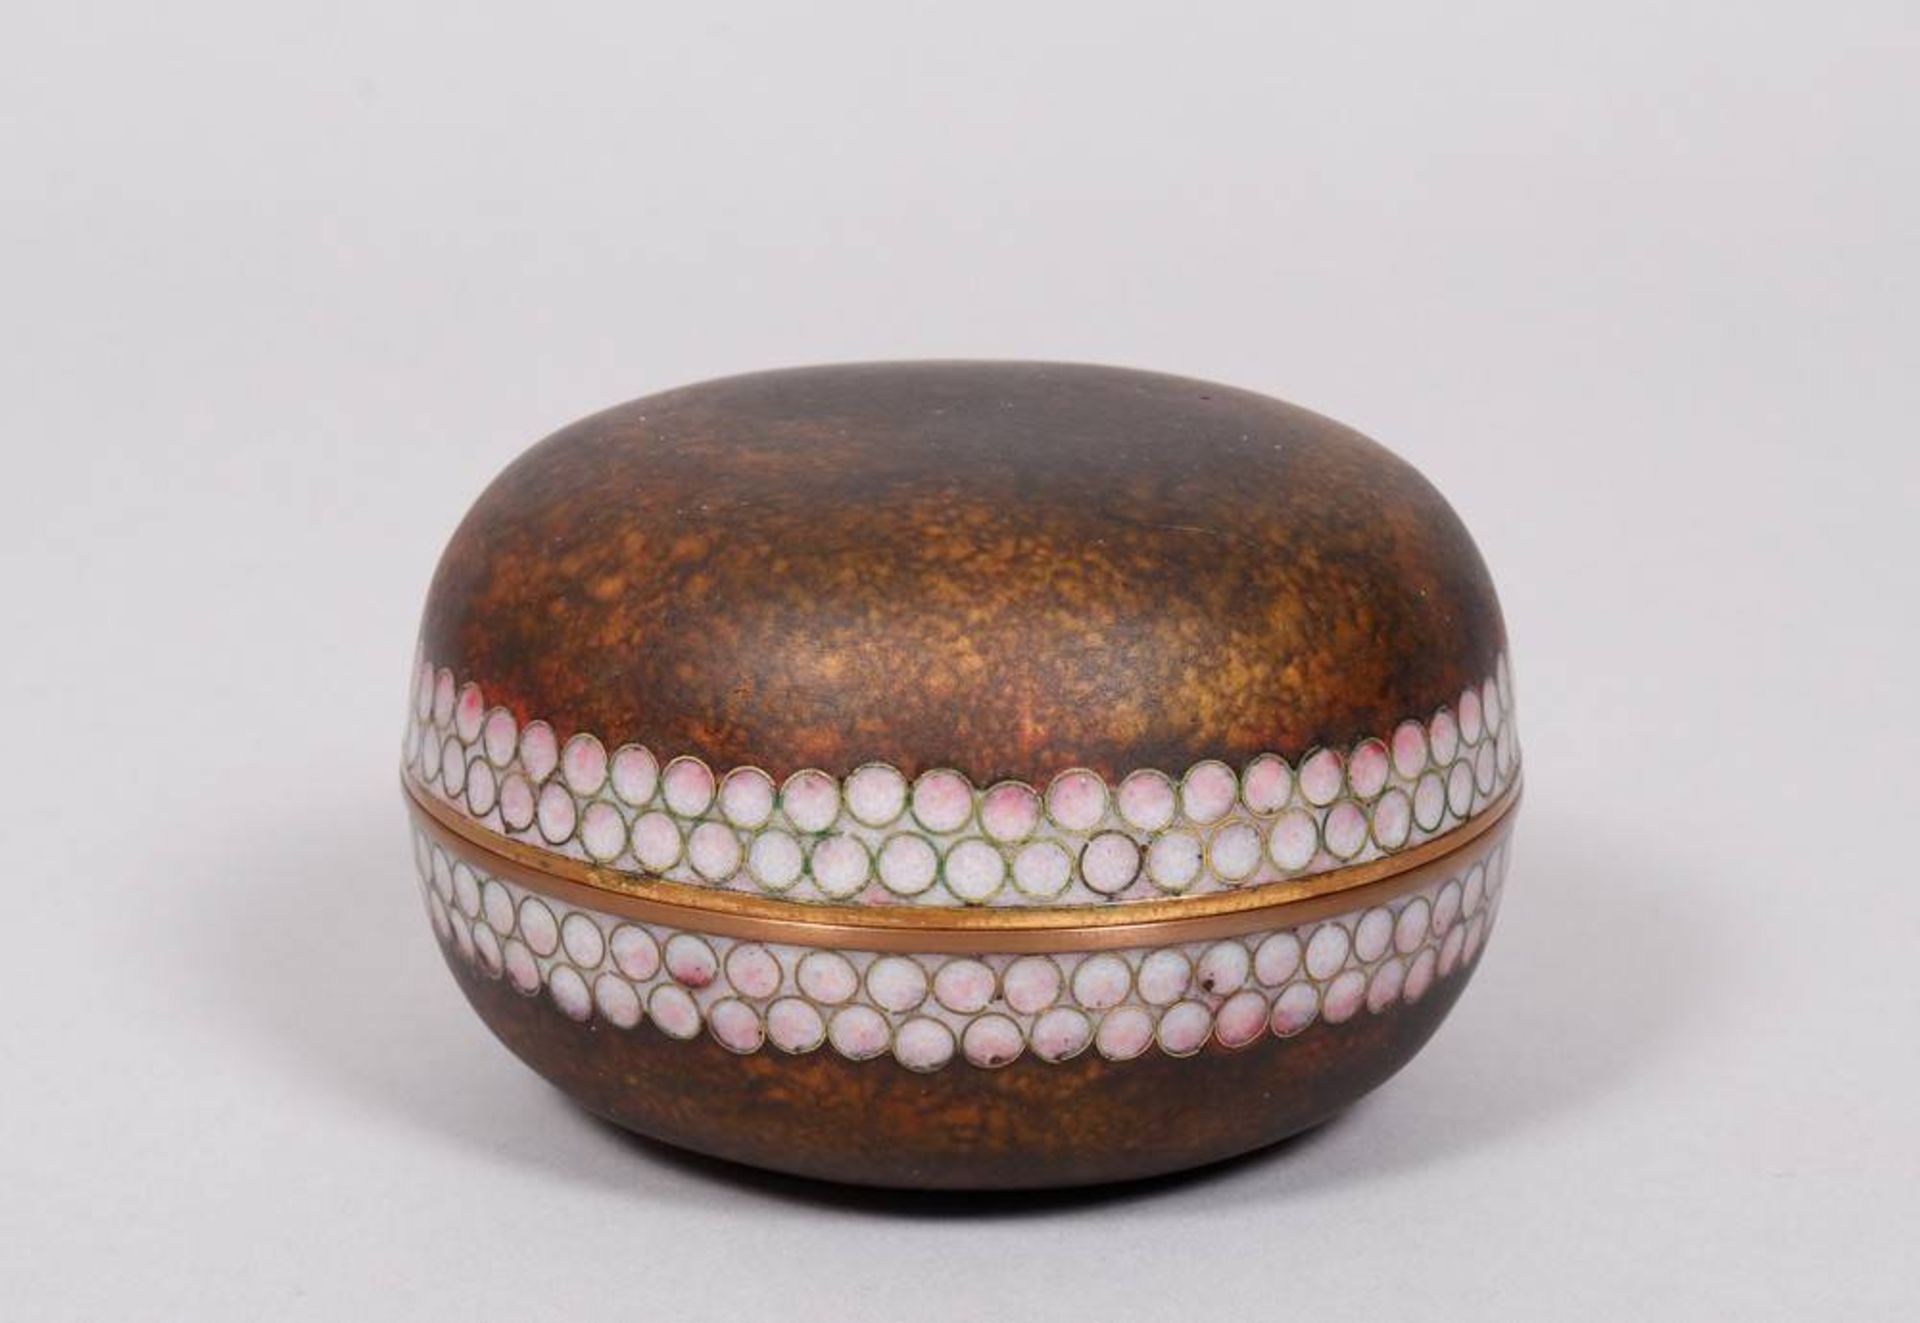 Cloisonné lidded jar, China, probably Republic Period - Image 2 of 3